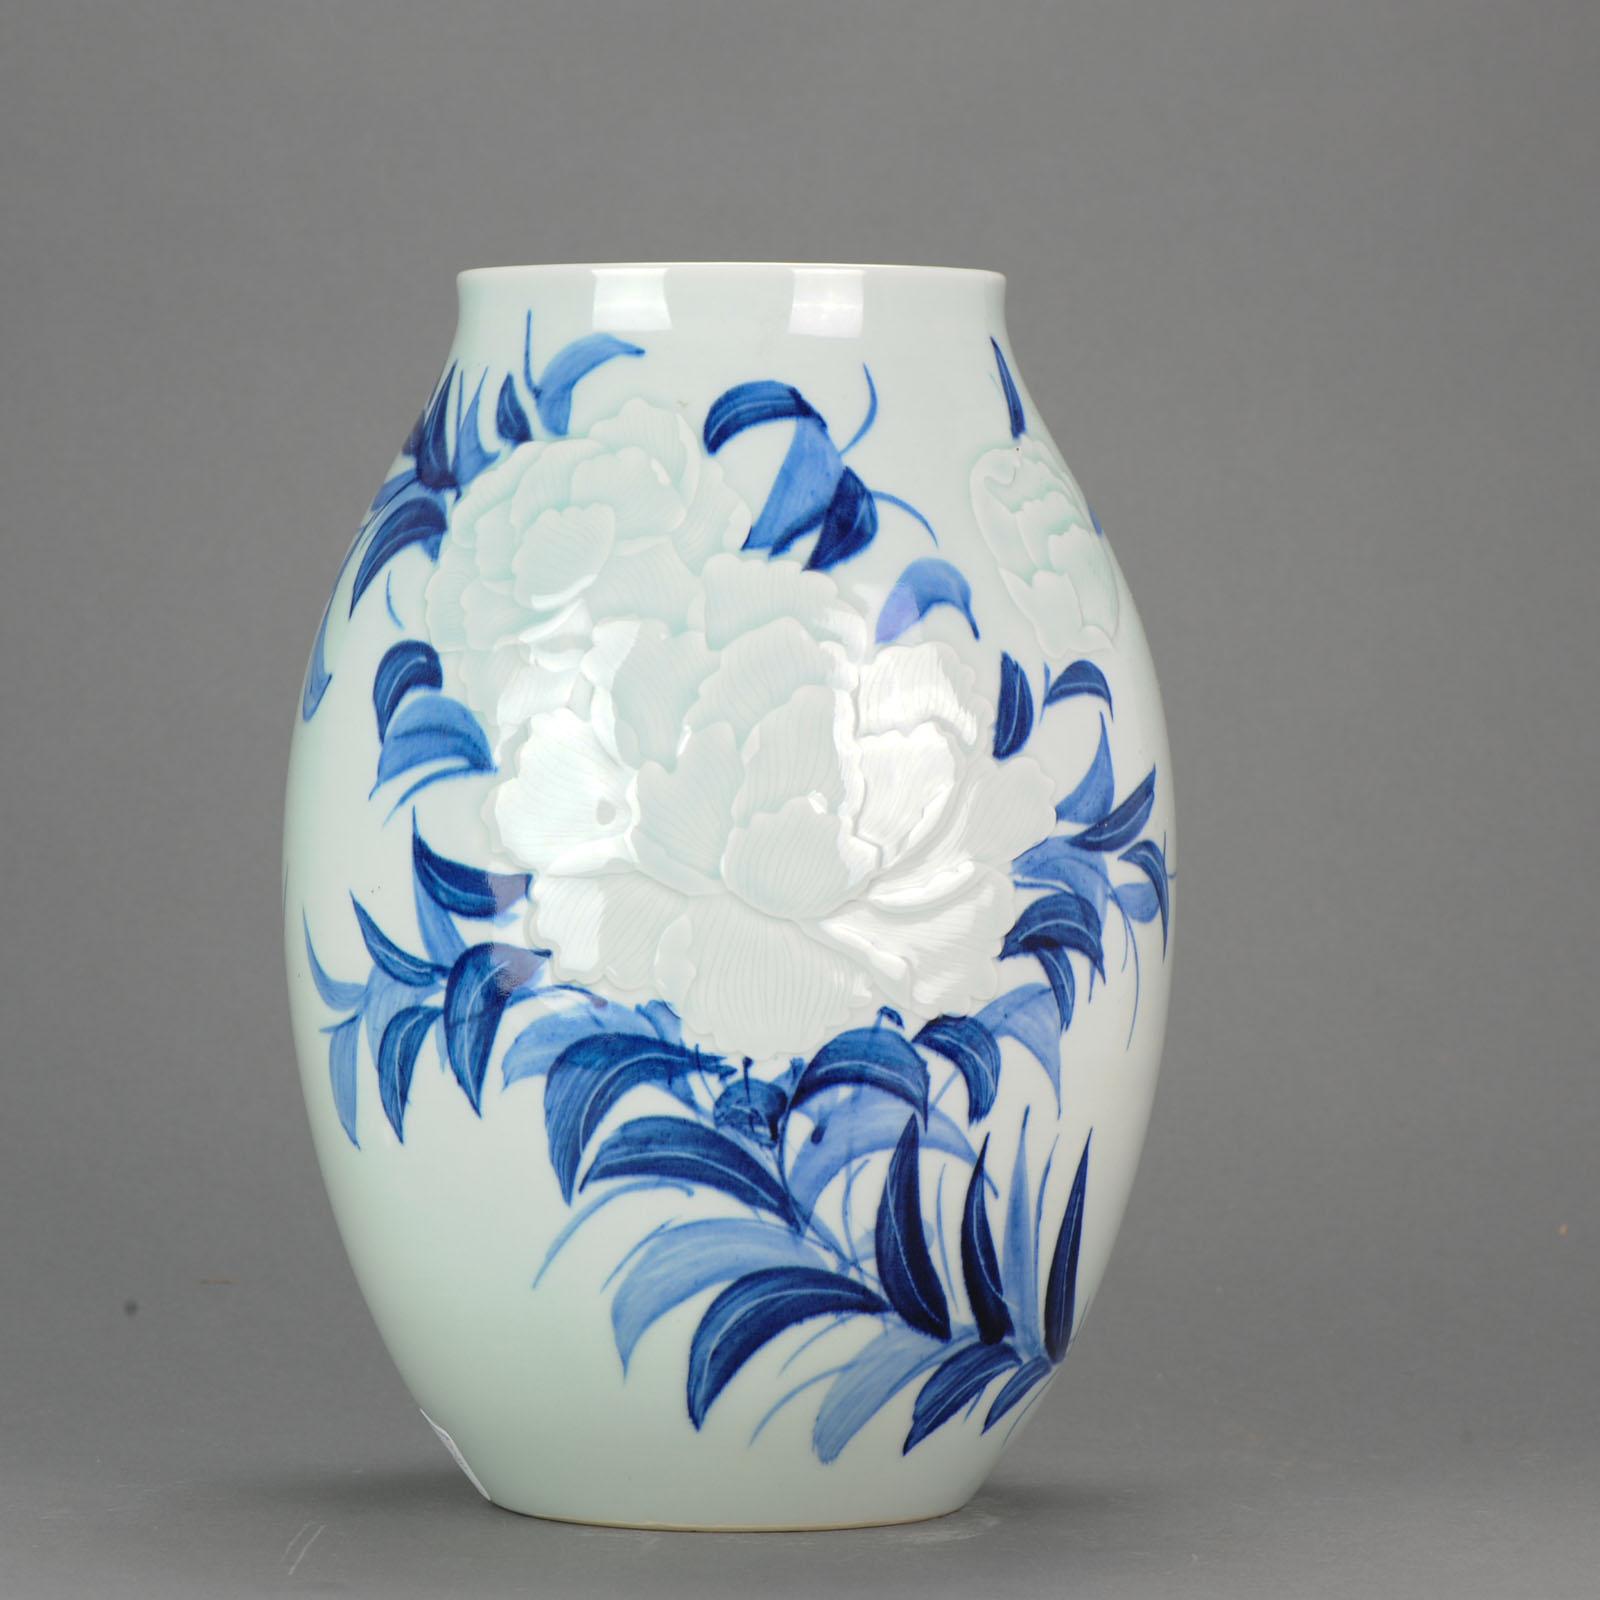 Wanglin '1972' Artist Mark Celadon Anhua Vase Dated 2001 Chinese Porcelain Vase For Sale 1